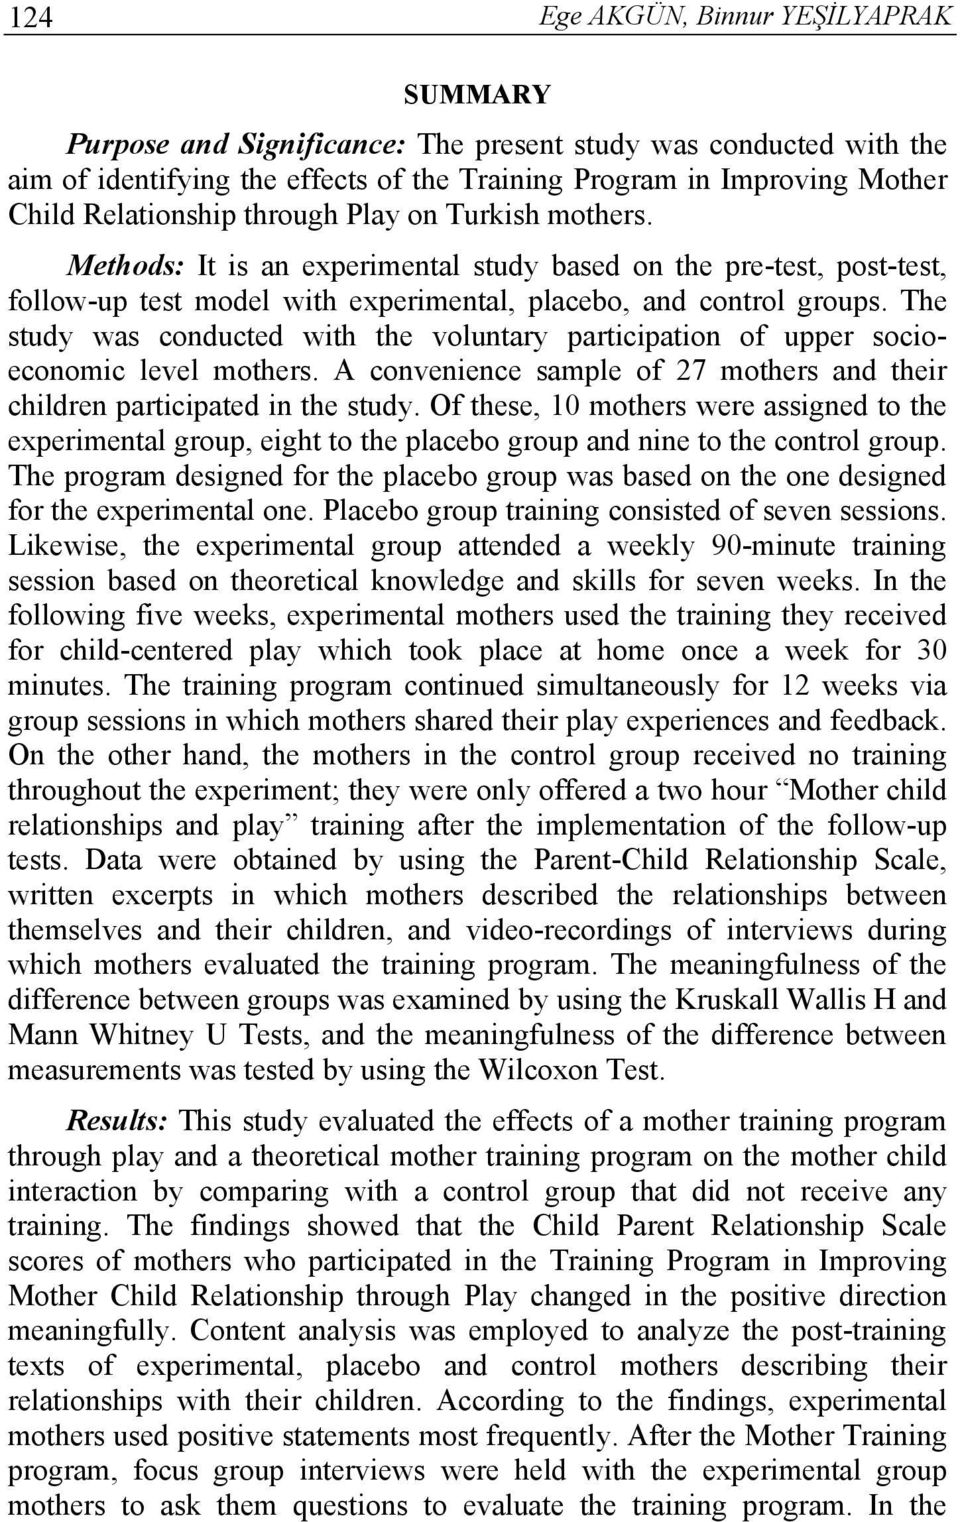 The study was conducted with the voluntary participation of upper socioeconomic level mothers. A convenience sample of 27 mothers and their children participated in the study.